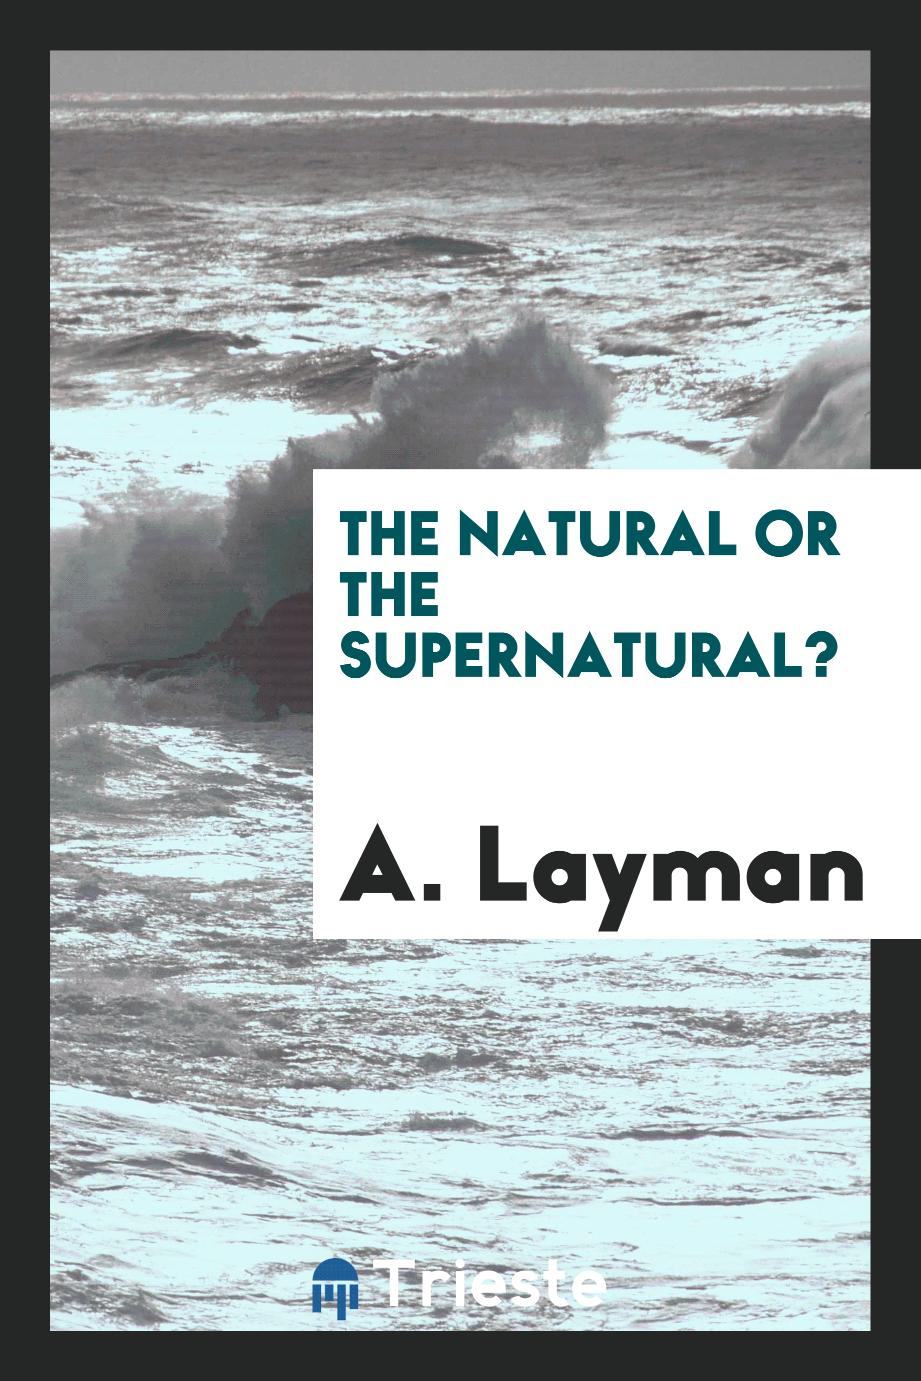 The Natural or the Supernatural?